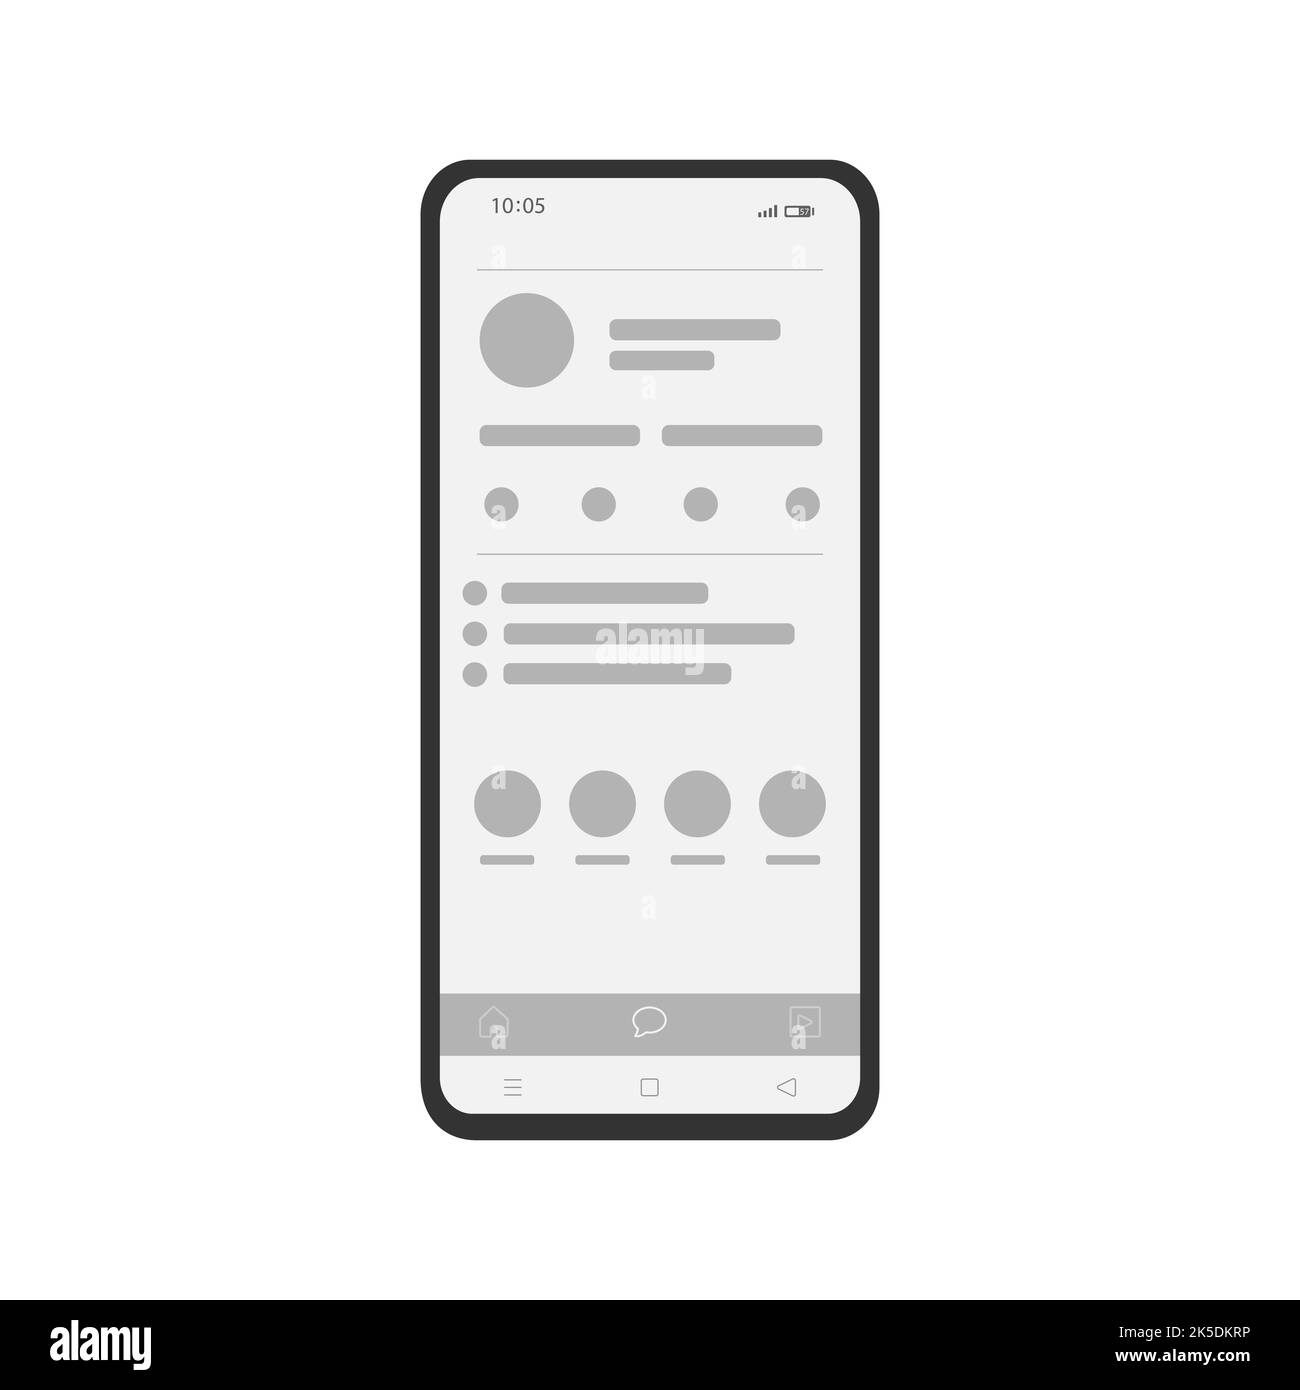 Mobile phone with social network design concept on the screen. Smartphone with interface carousel on social network. Stock Vector